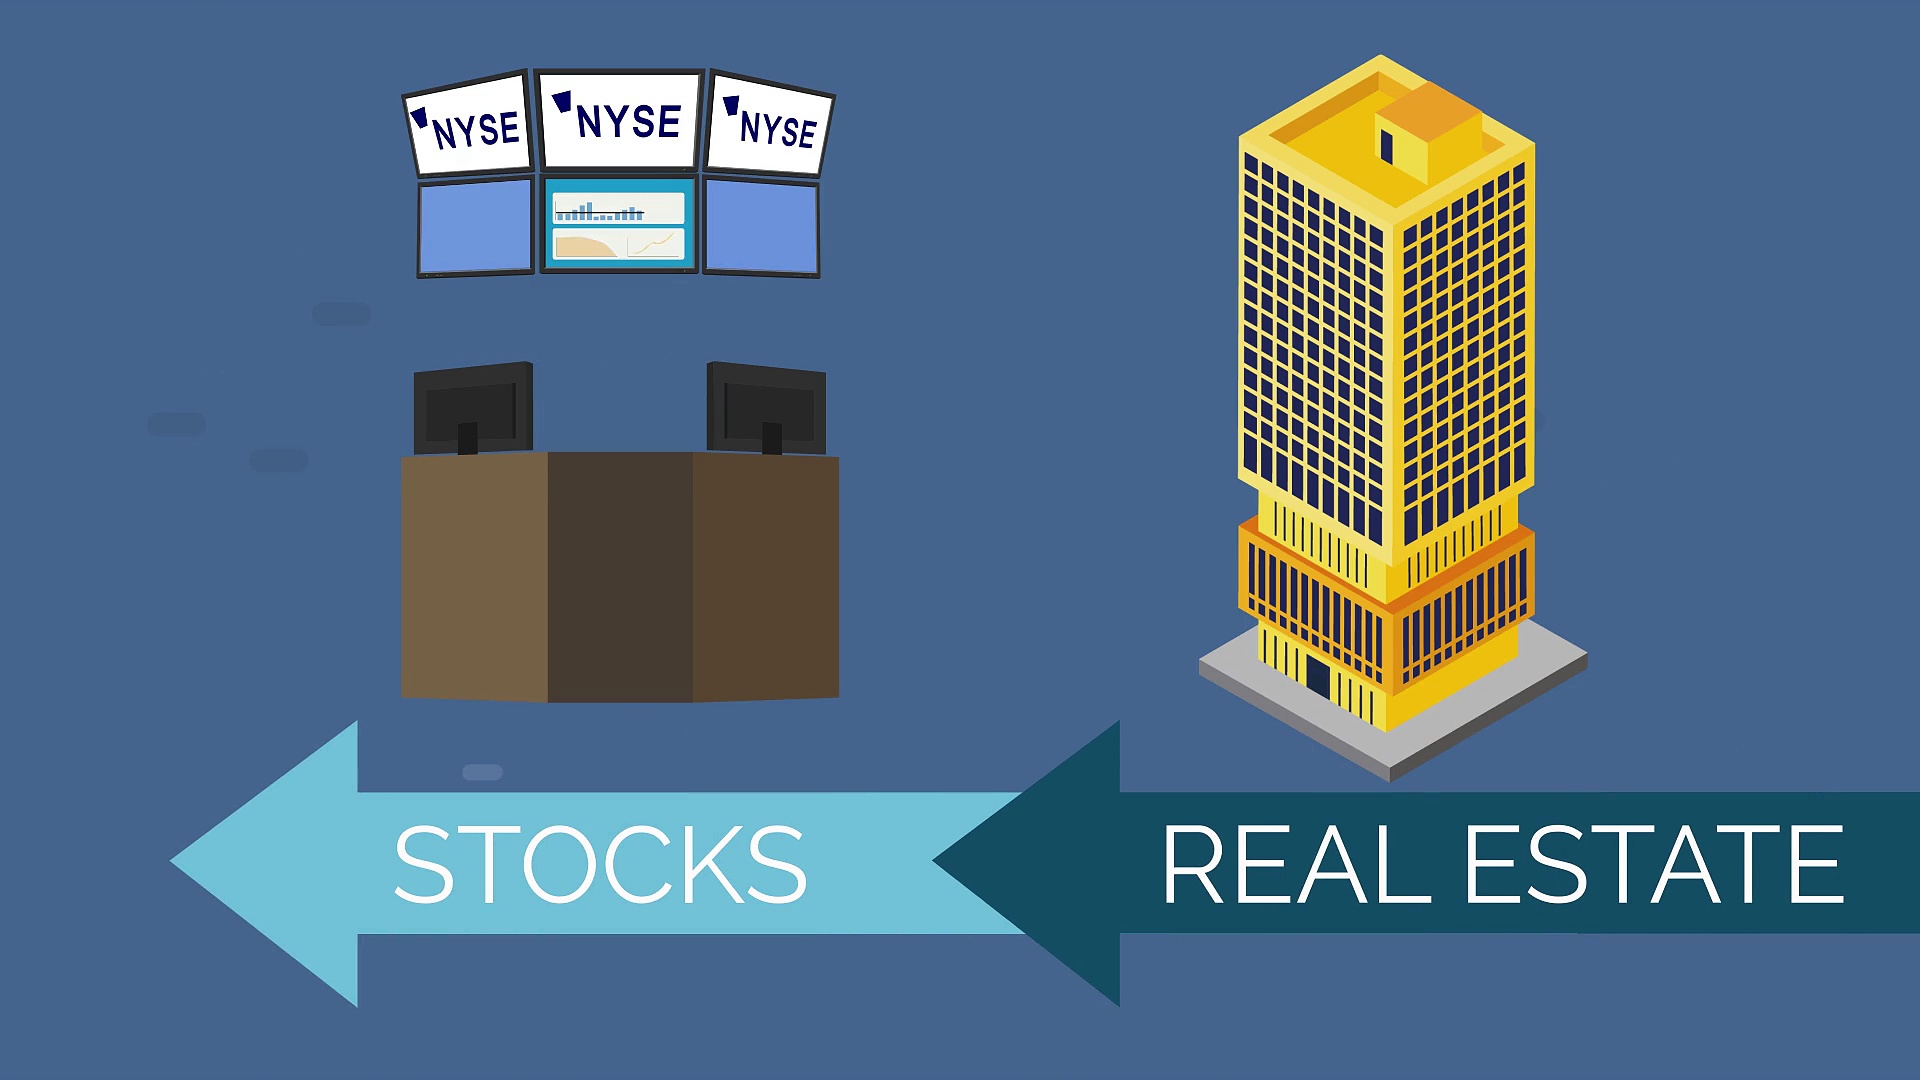 Key Disadvantages of Investing in Stocks vs. Buying Real Estate